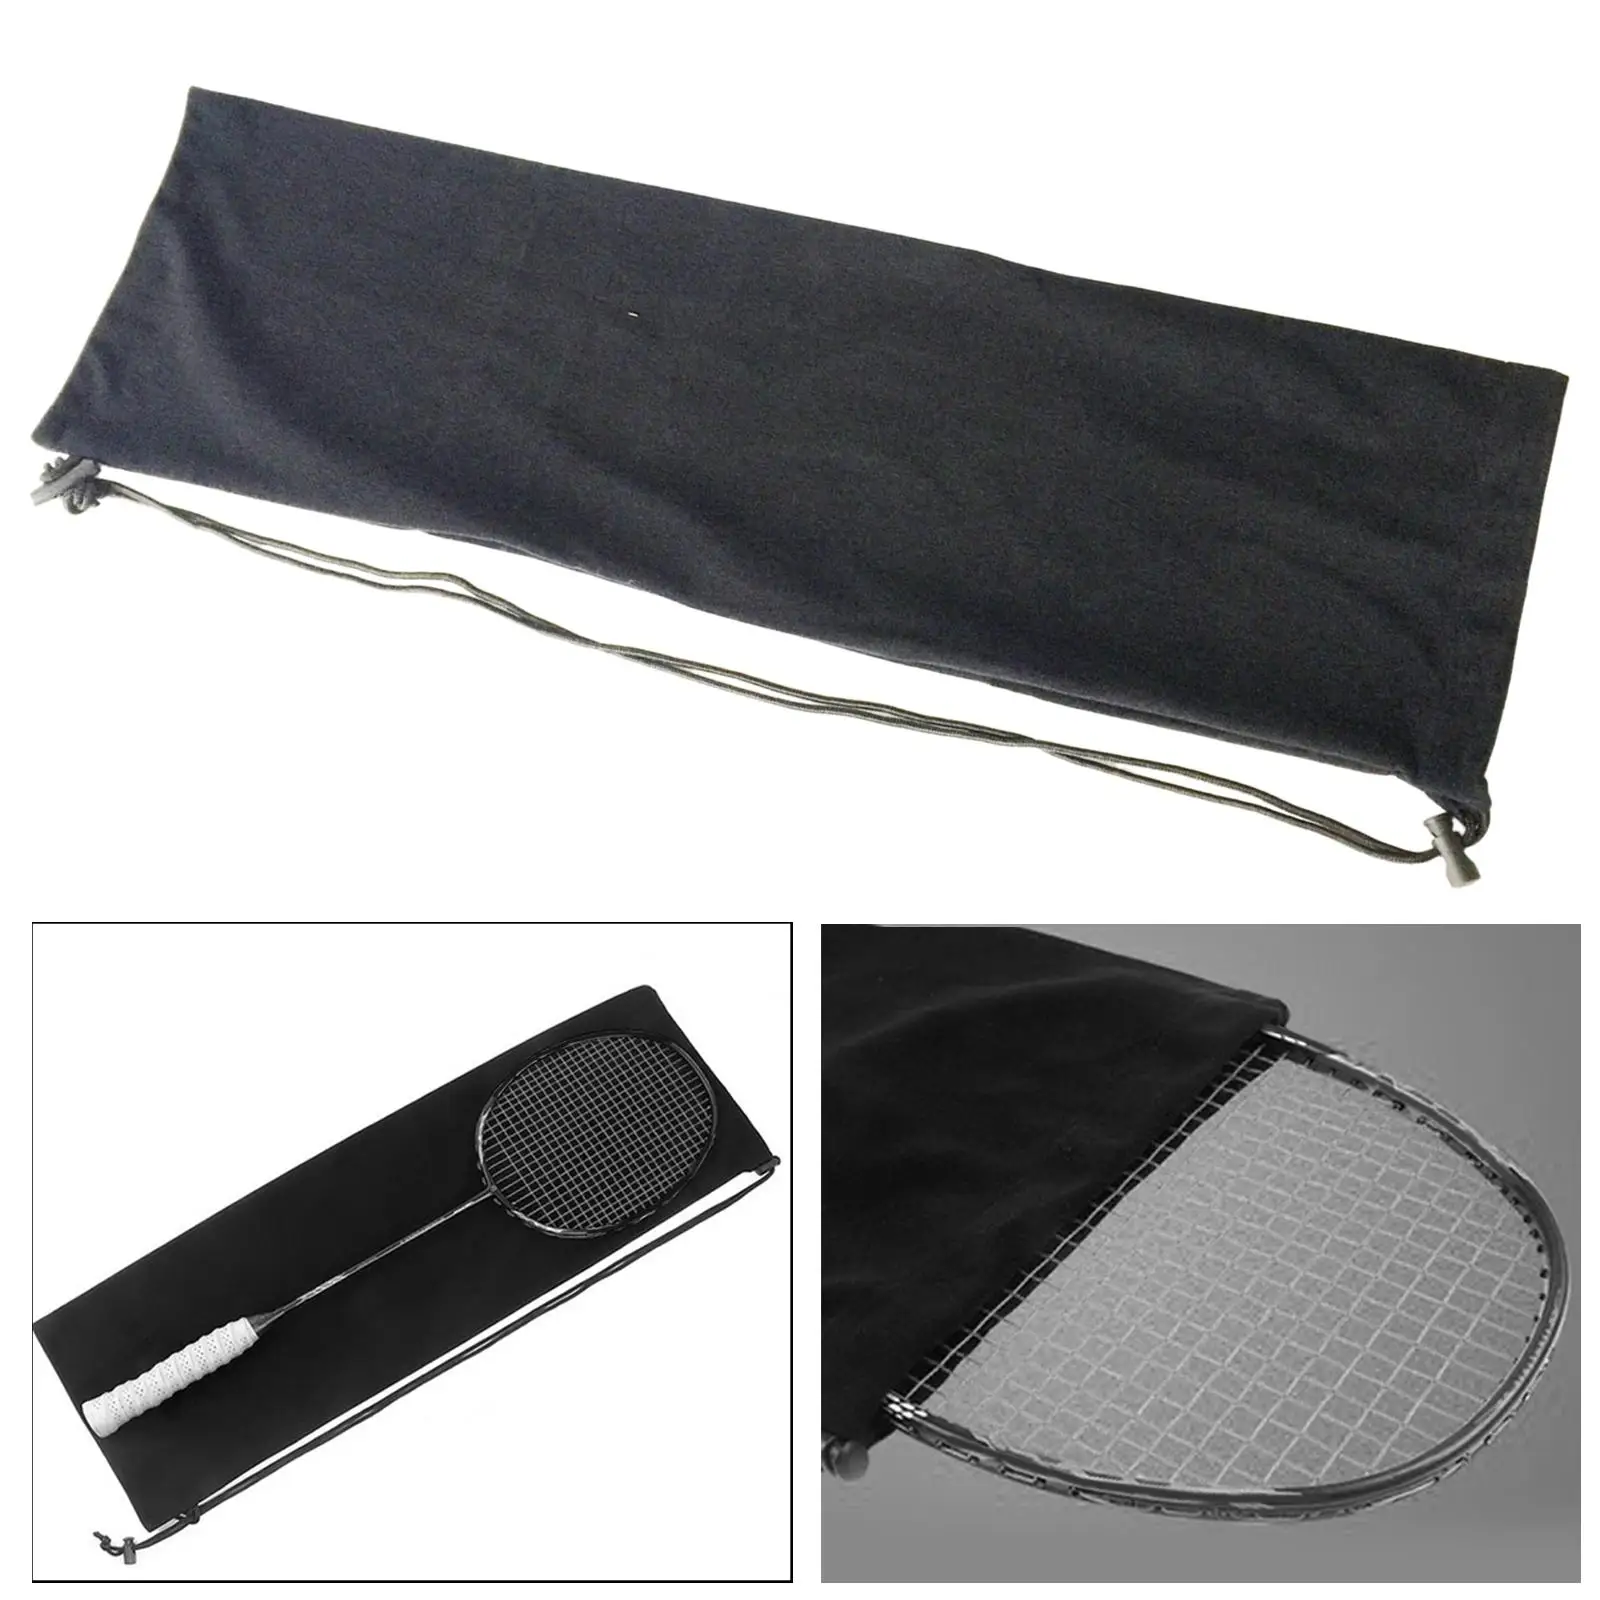 Badminton Racket Cover Bag Drawstring Bag Protective Carry Case Soft Dustproof Pouch for Beginner Players Outdoor Sports Unisex